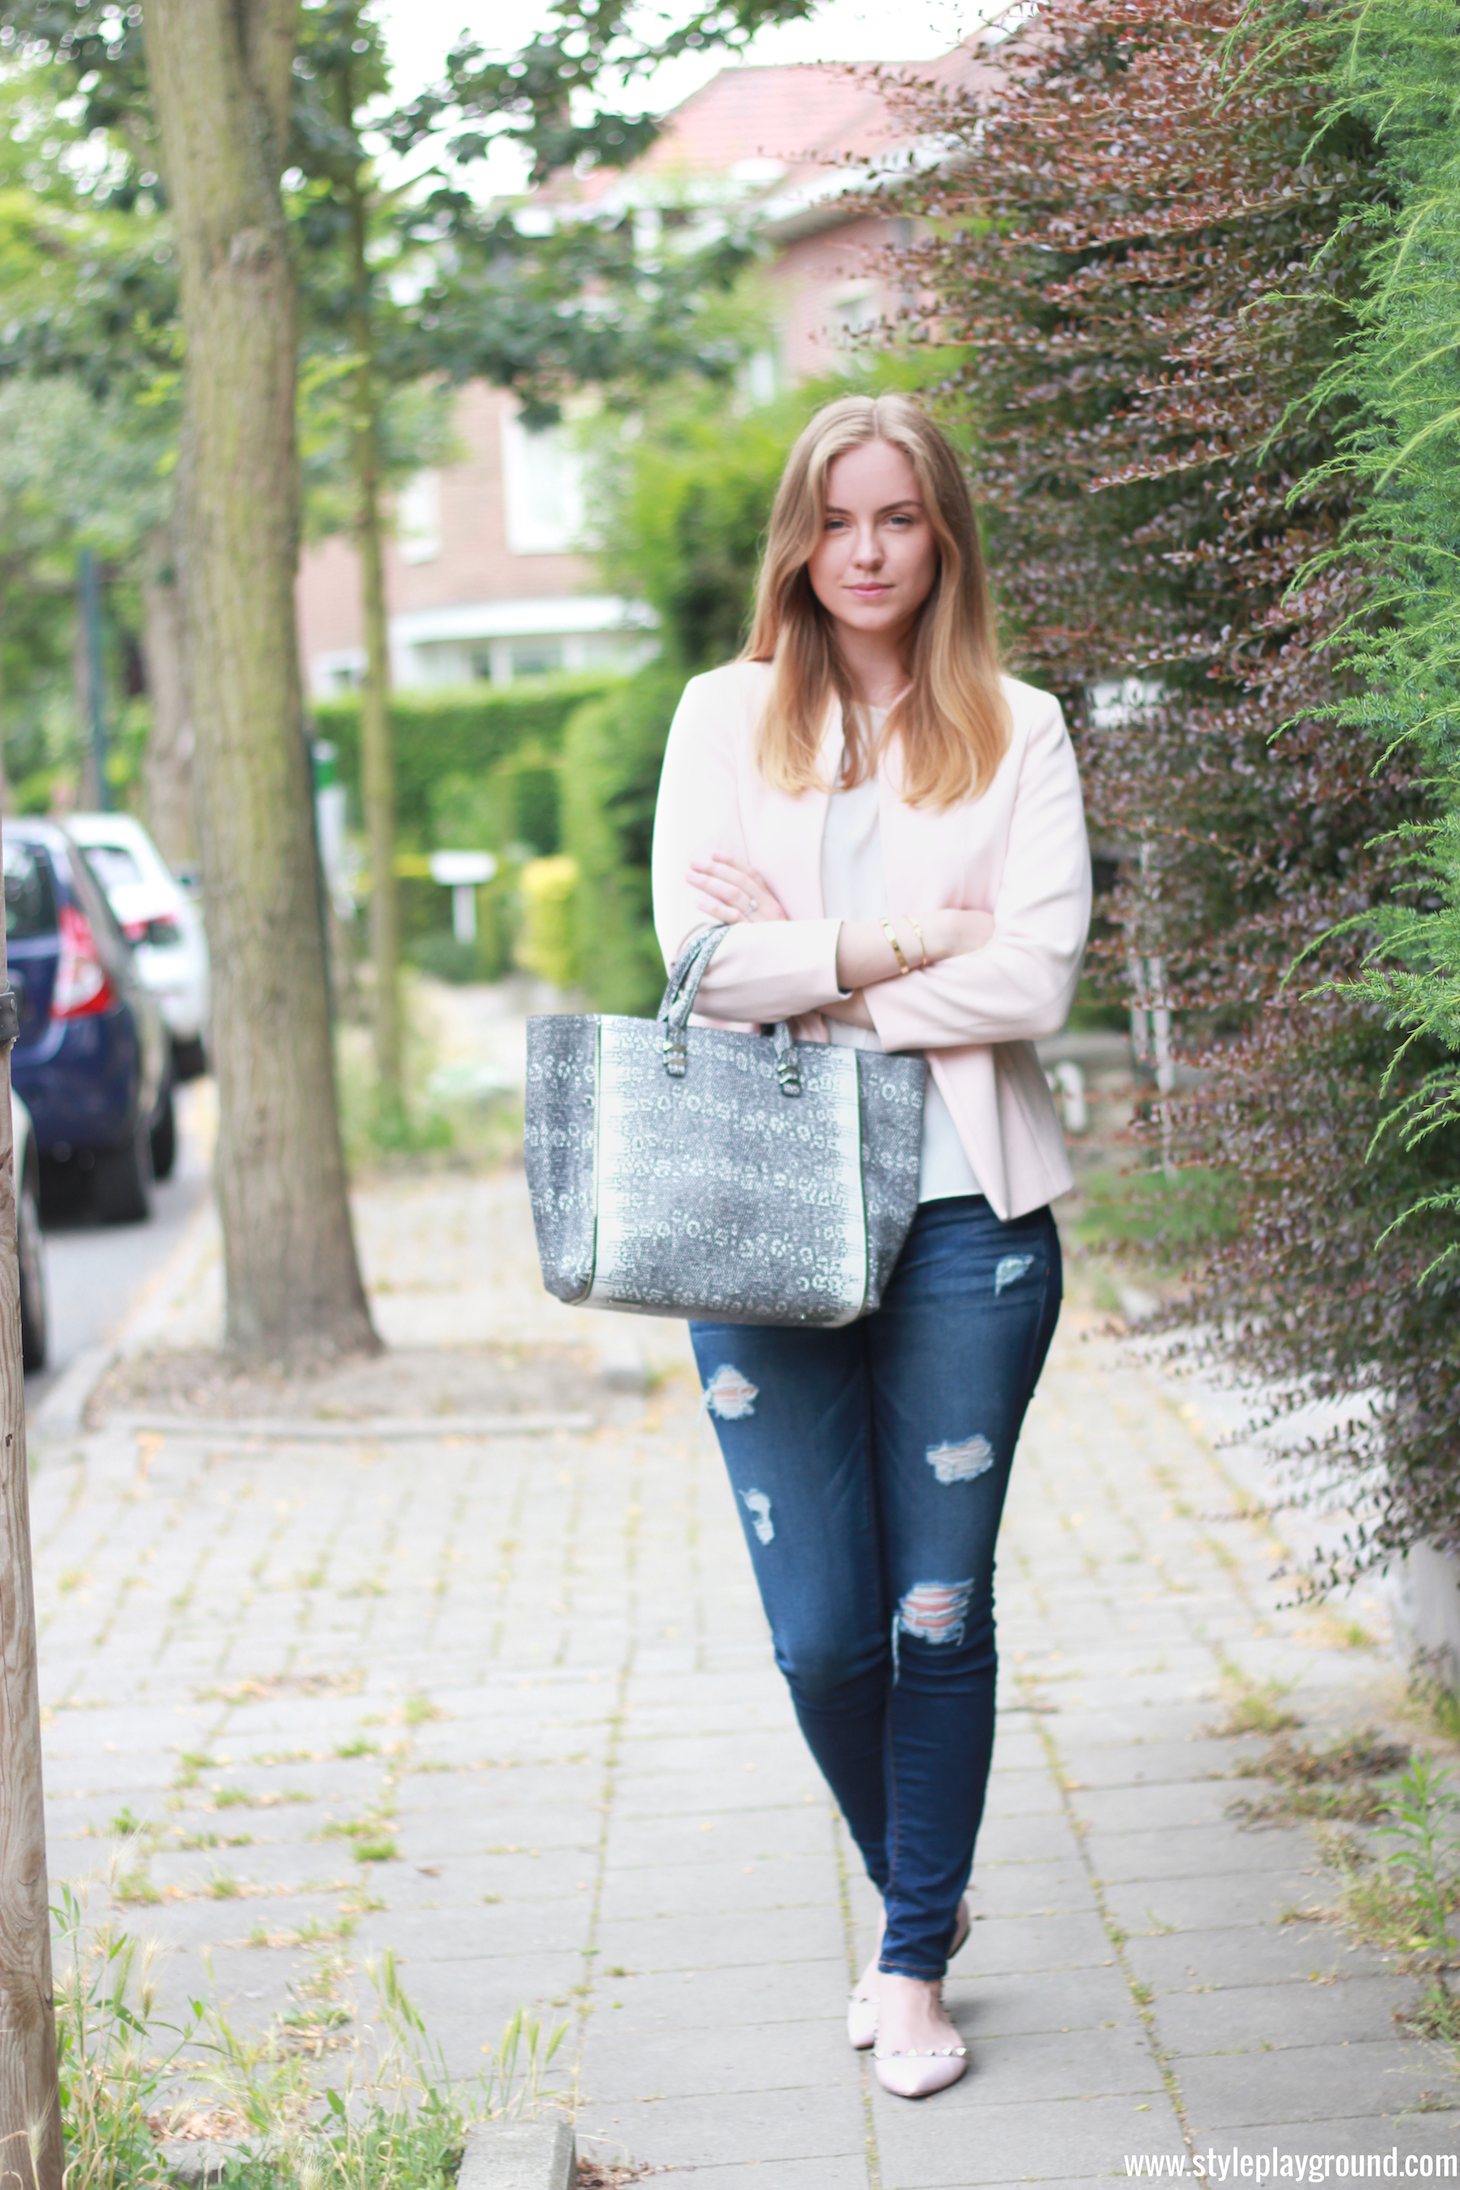 Axelle Blanpain from Style playground is wearing American Eagle ripped jeans, H&M blazer, Zara top, Rebecca Minkoff mini Perry tote & Valentino rockstud flats